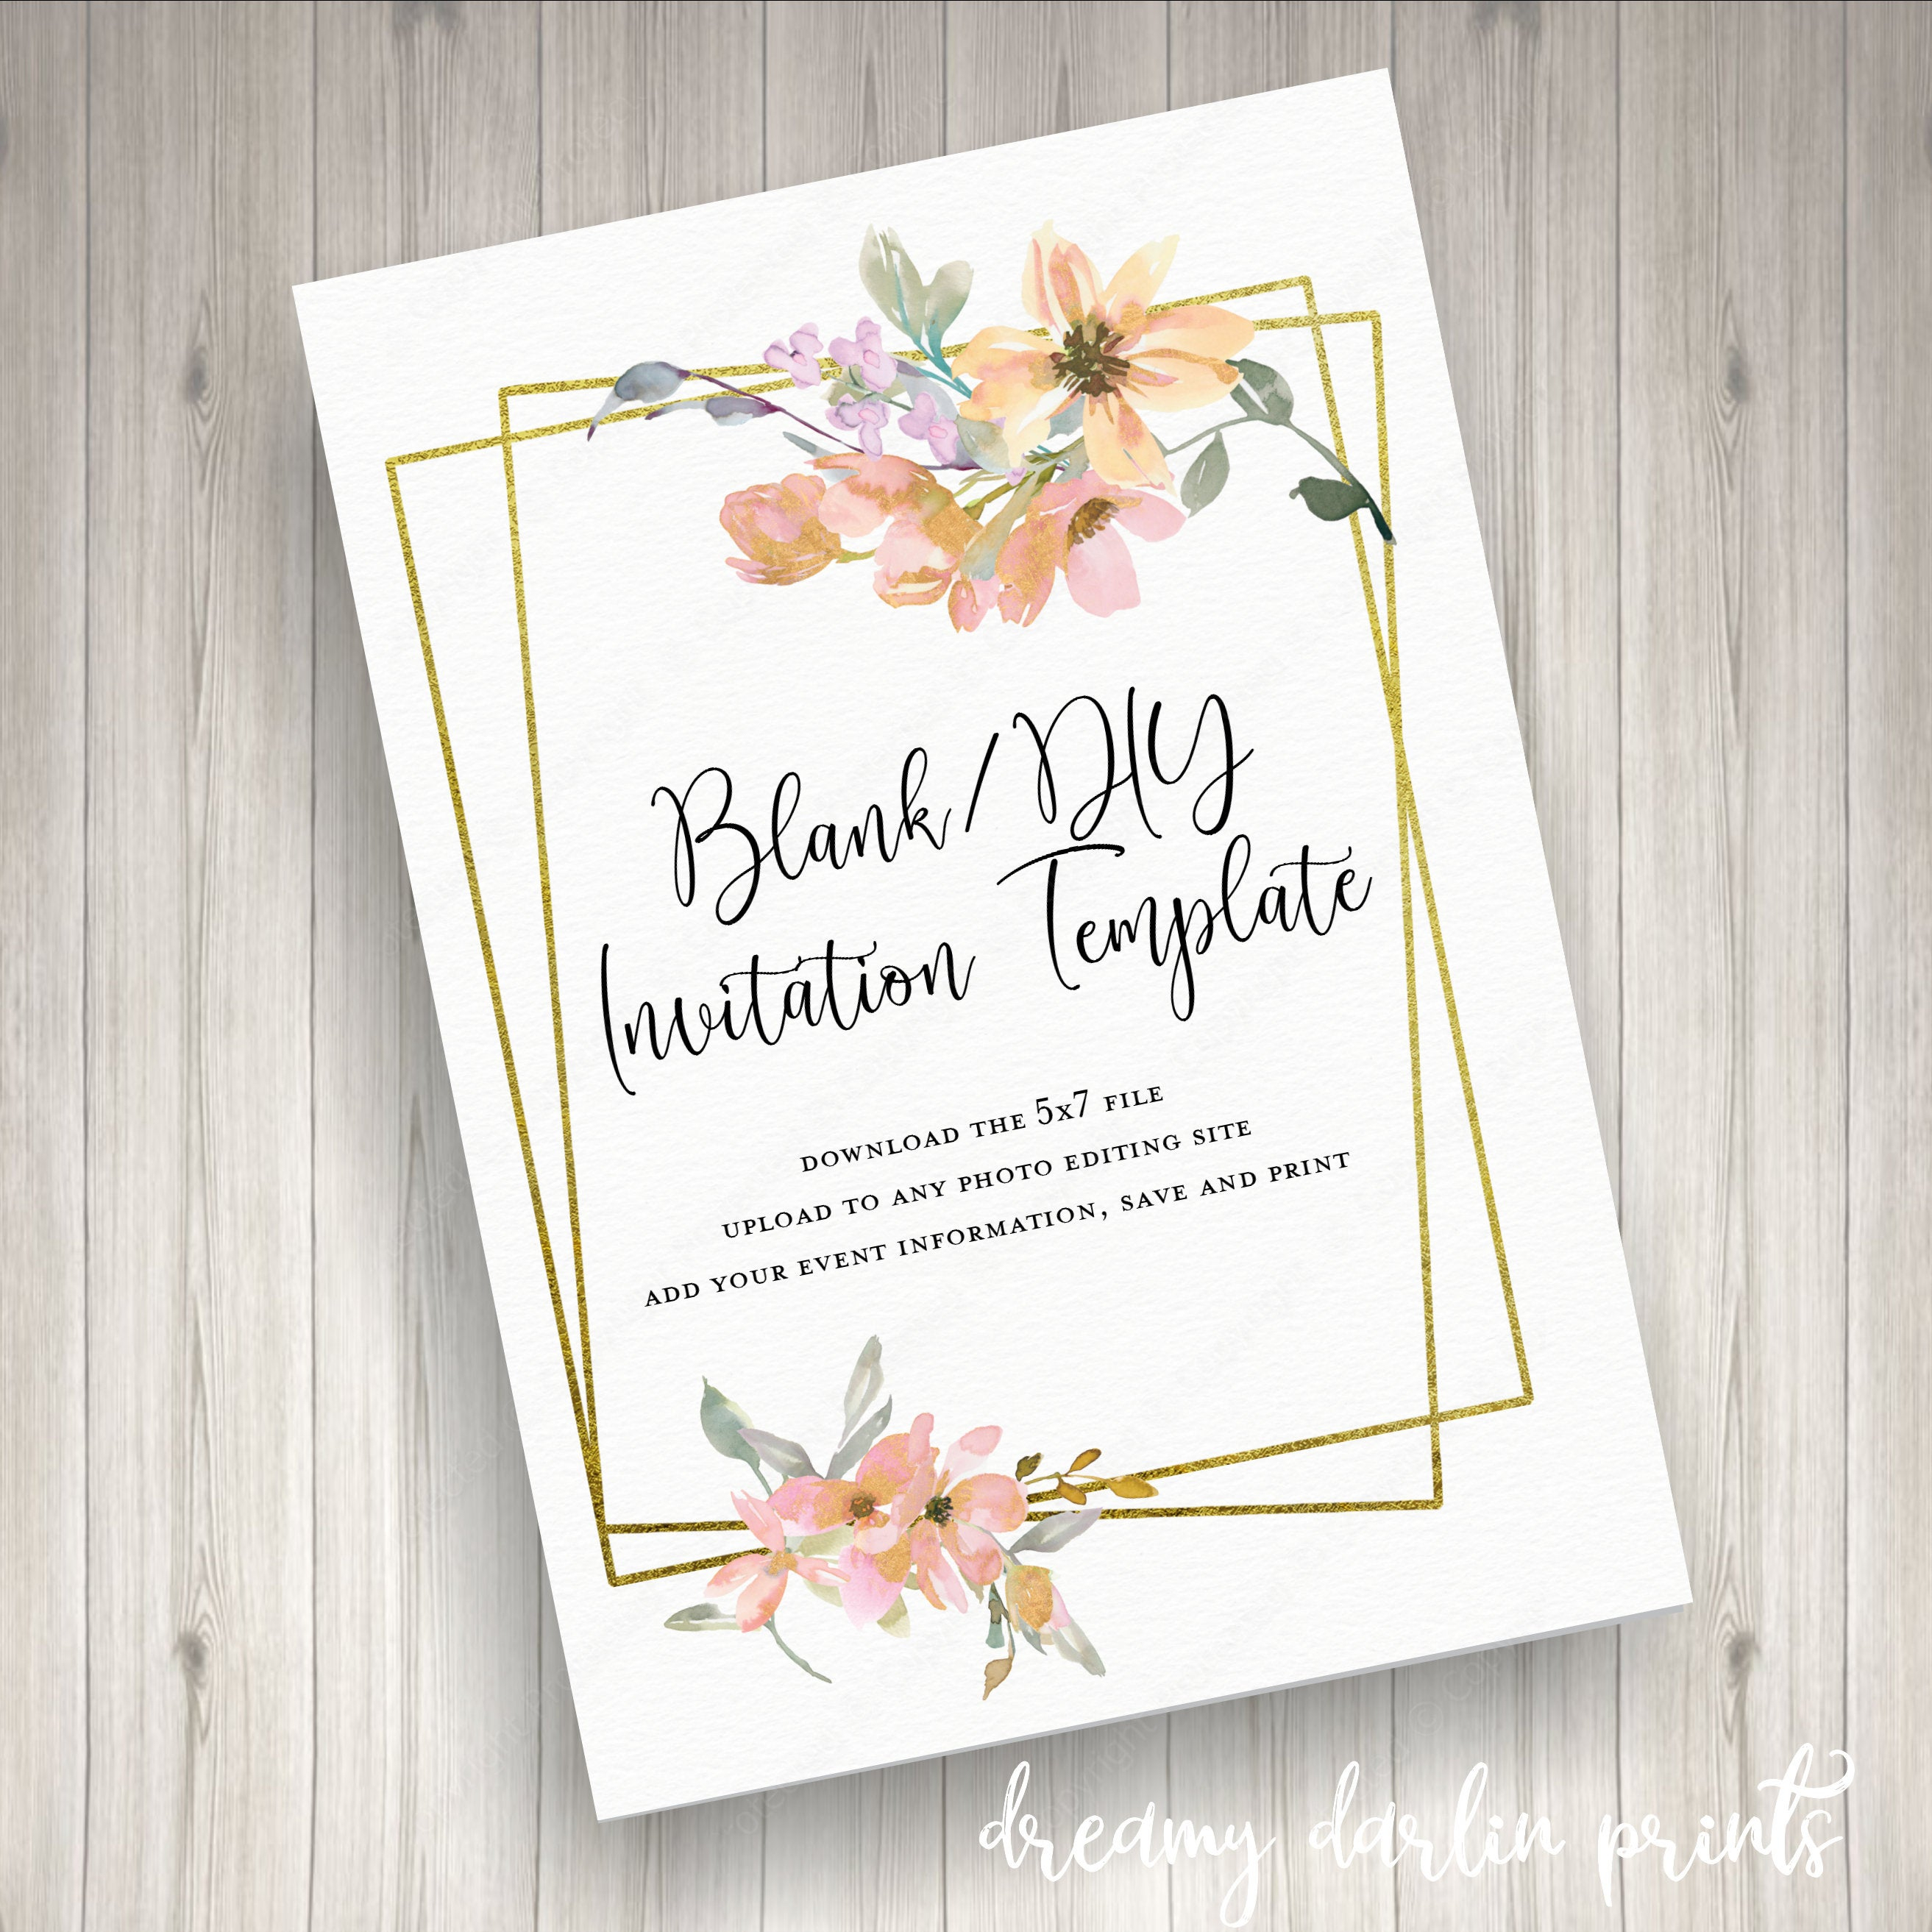 Blankdiy Watercolor Floral Invitation Template 5x7 Etsy intended for measurements 2626 X 2626